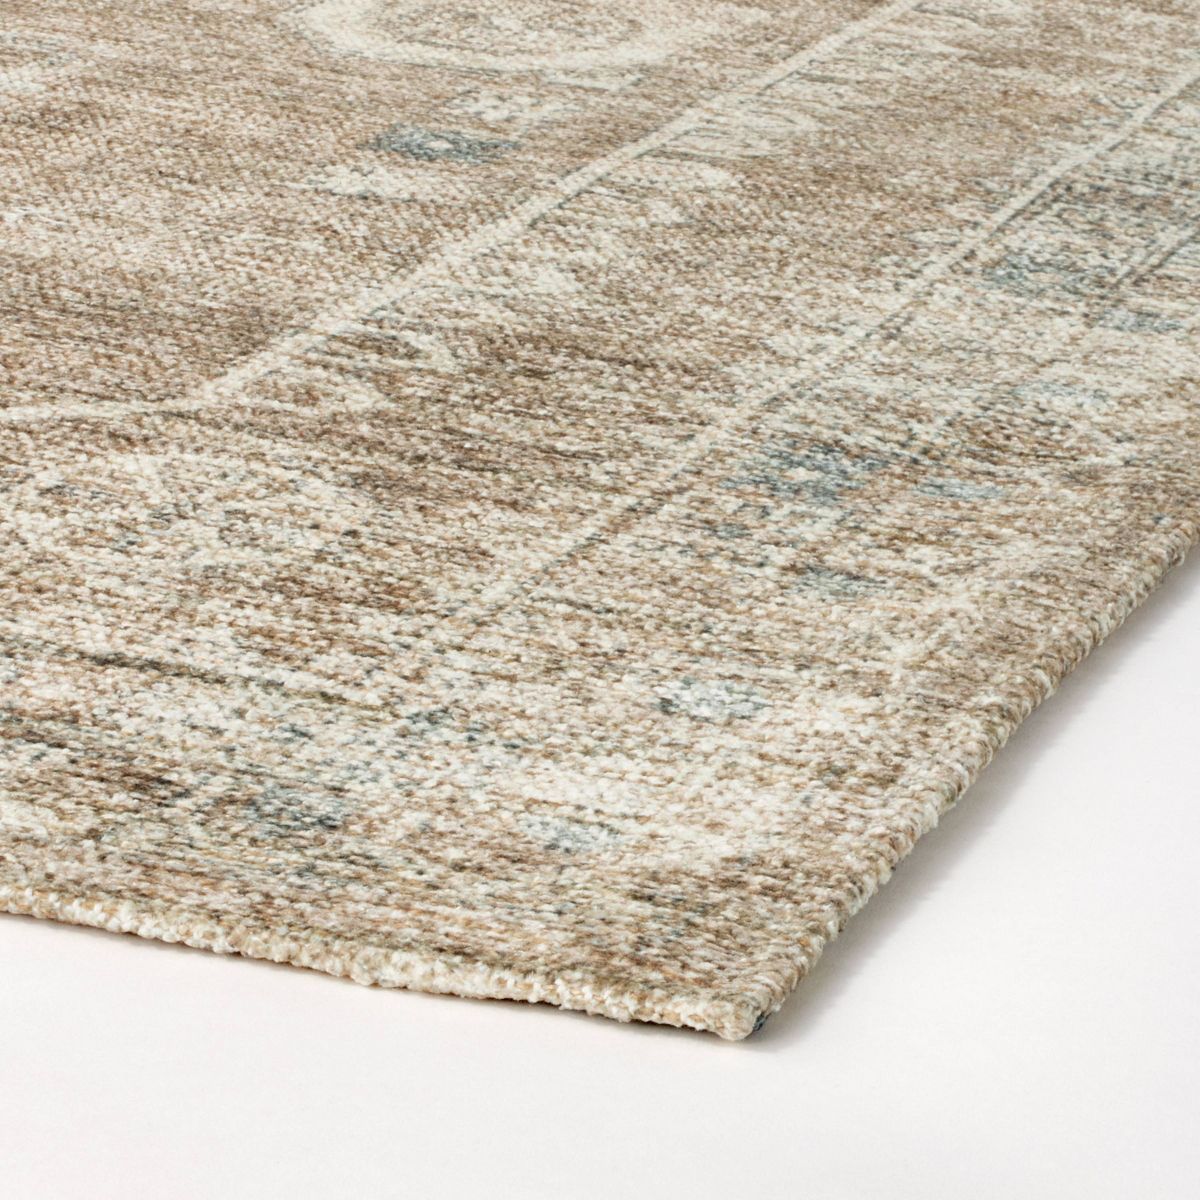 Distressed Persian Woven Area Rug Brown - Threshold™ designed with Studio McGee | Target